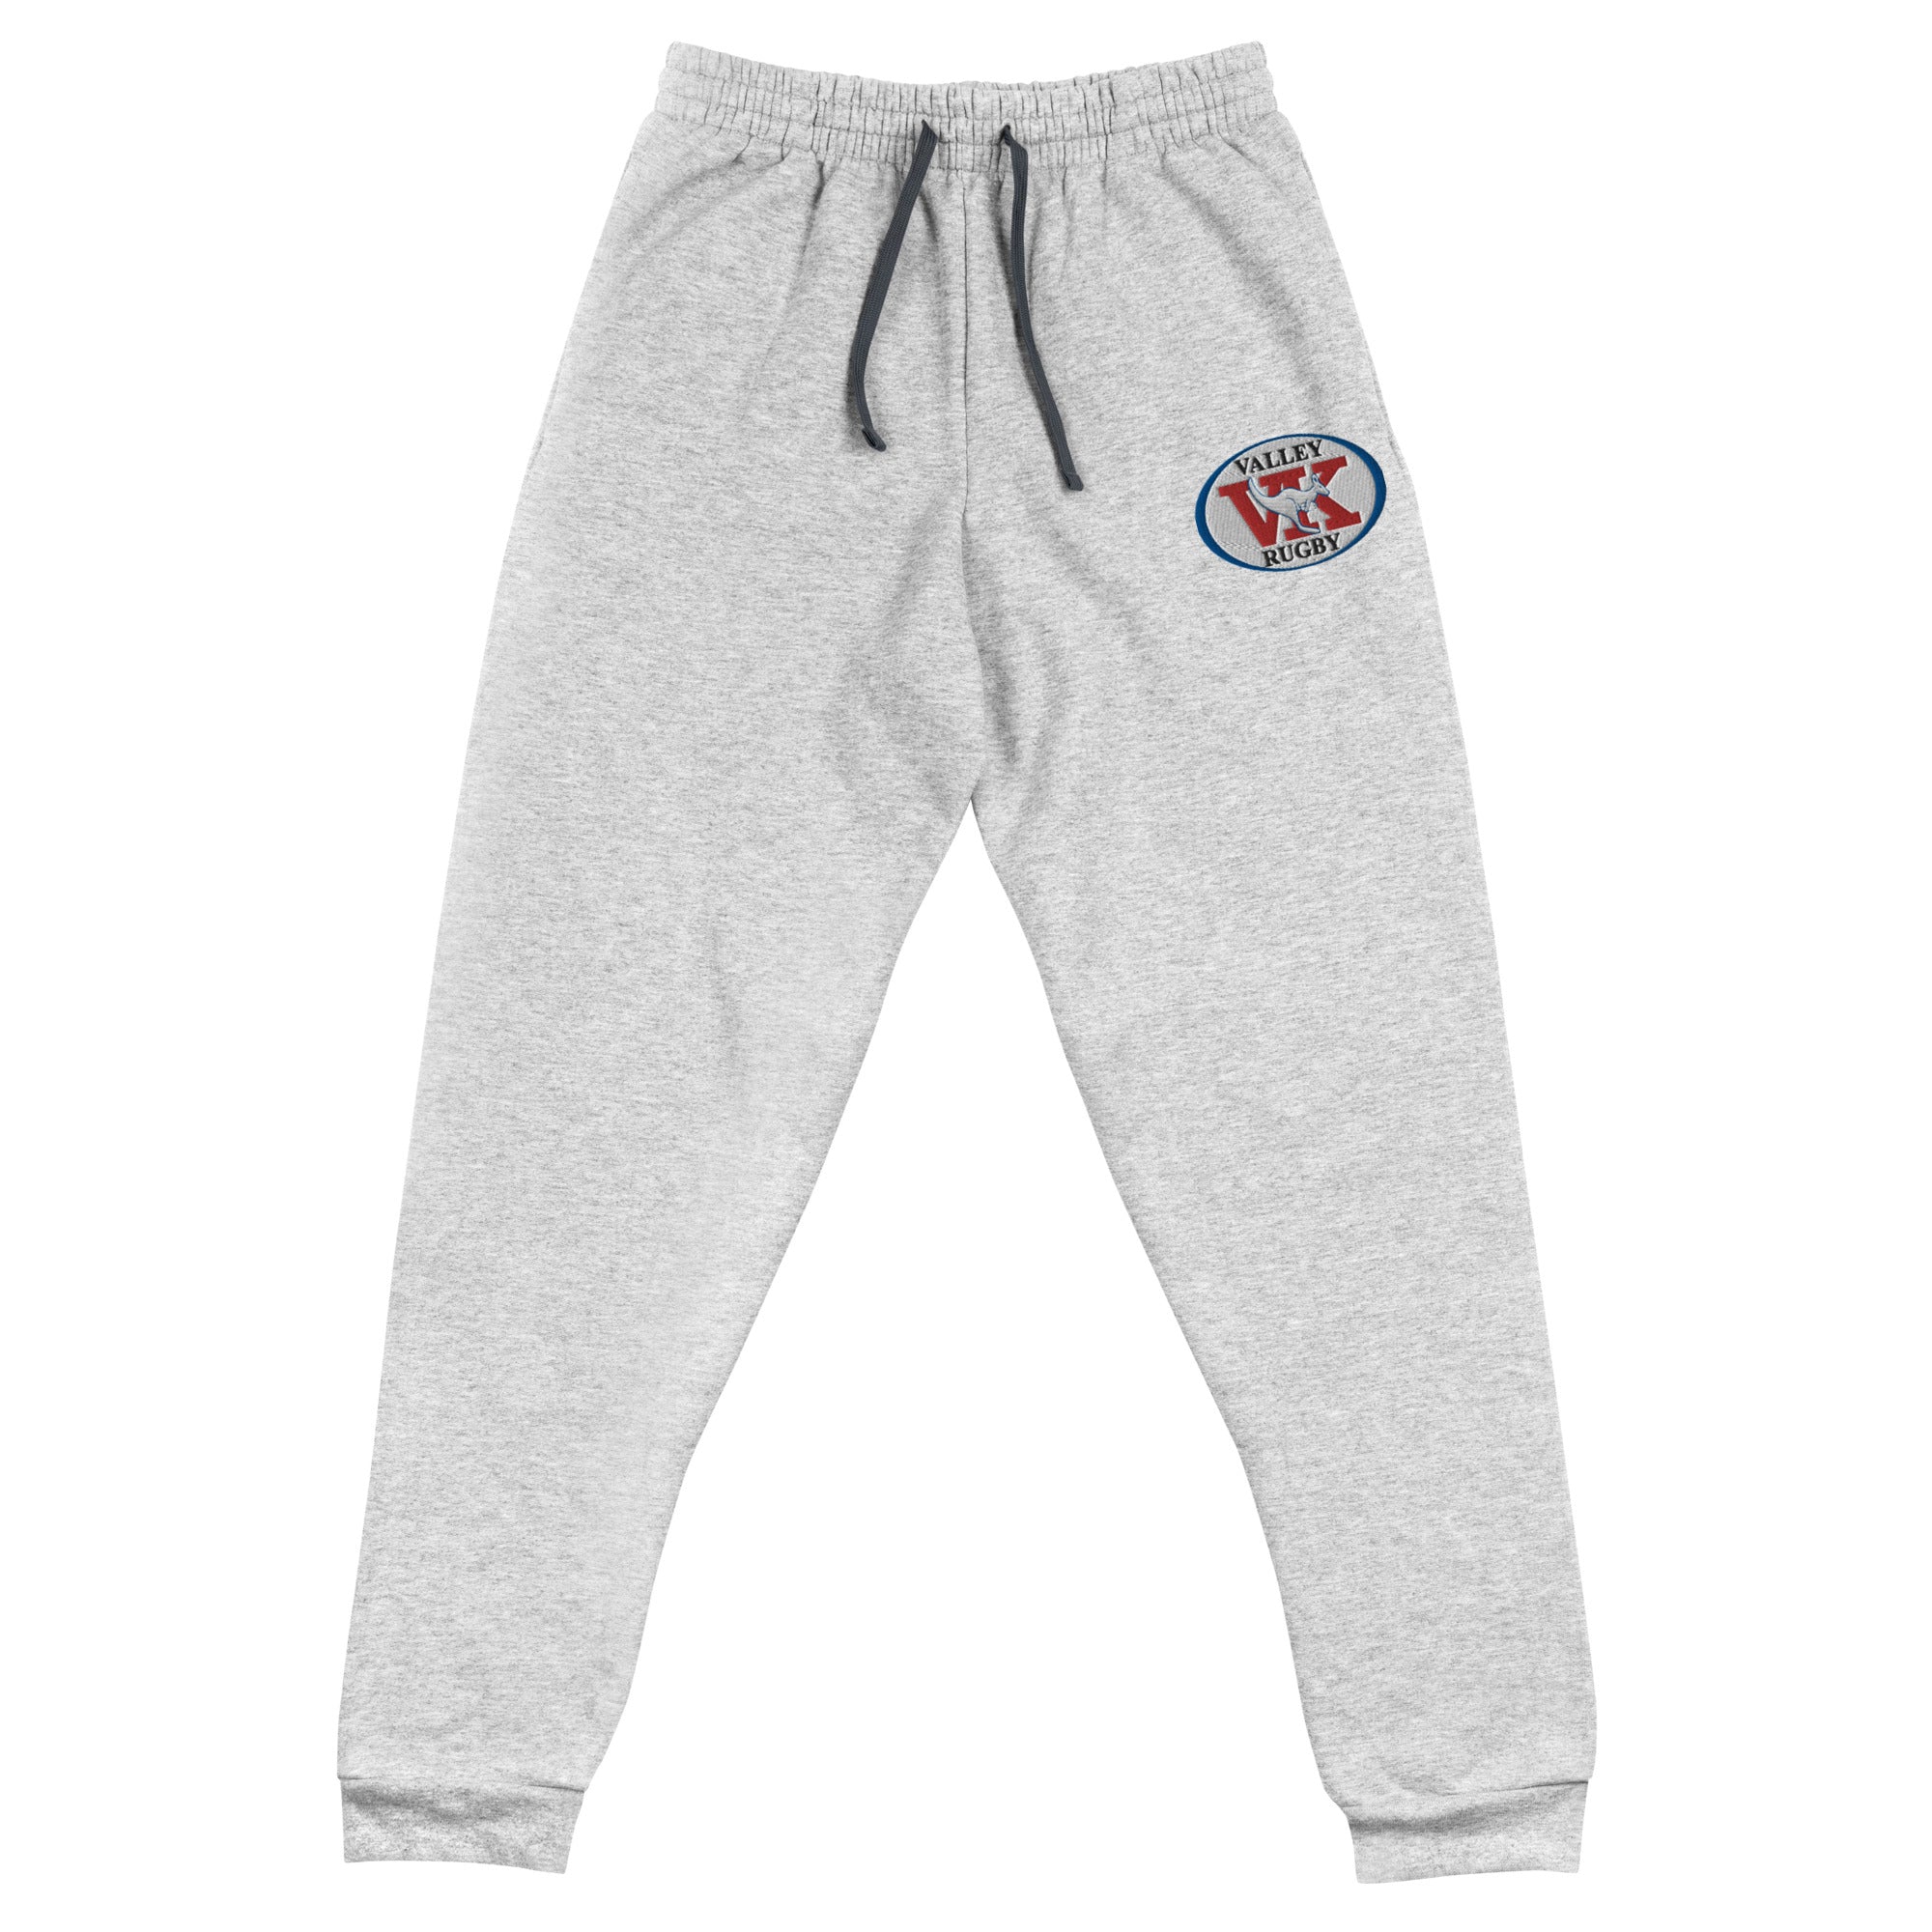 Rugby Imports Valley Kangaroos Jogger Sweatpants